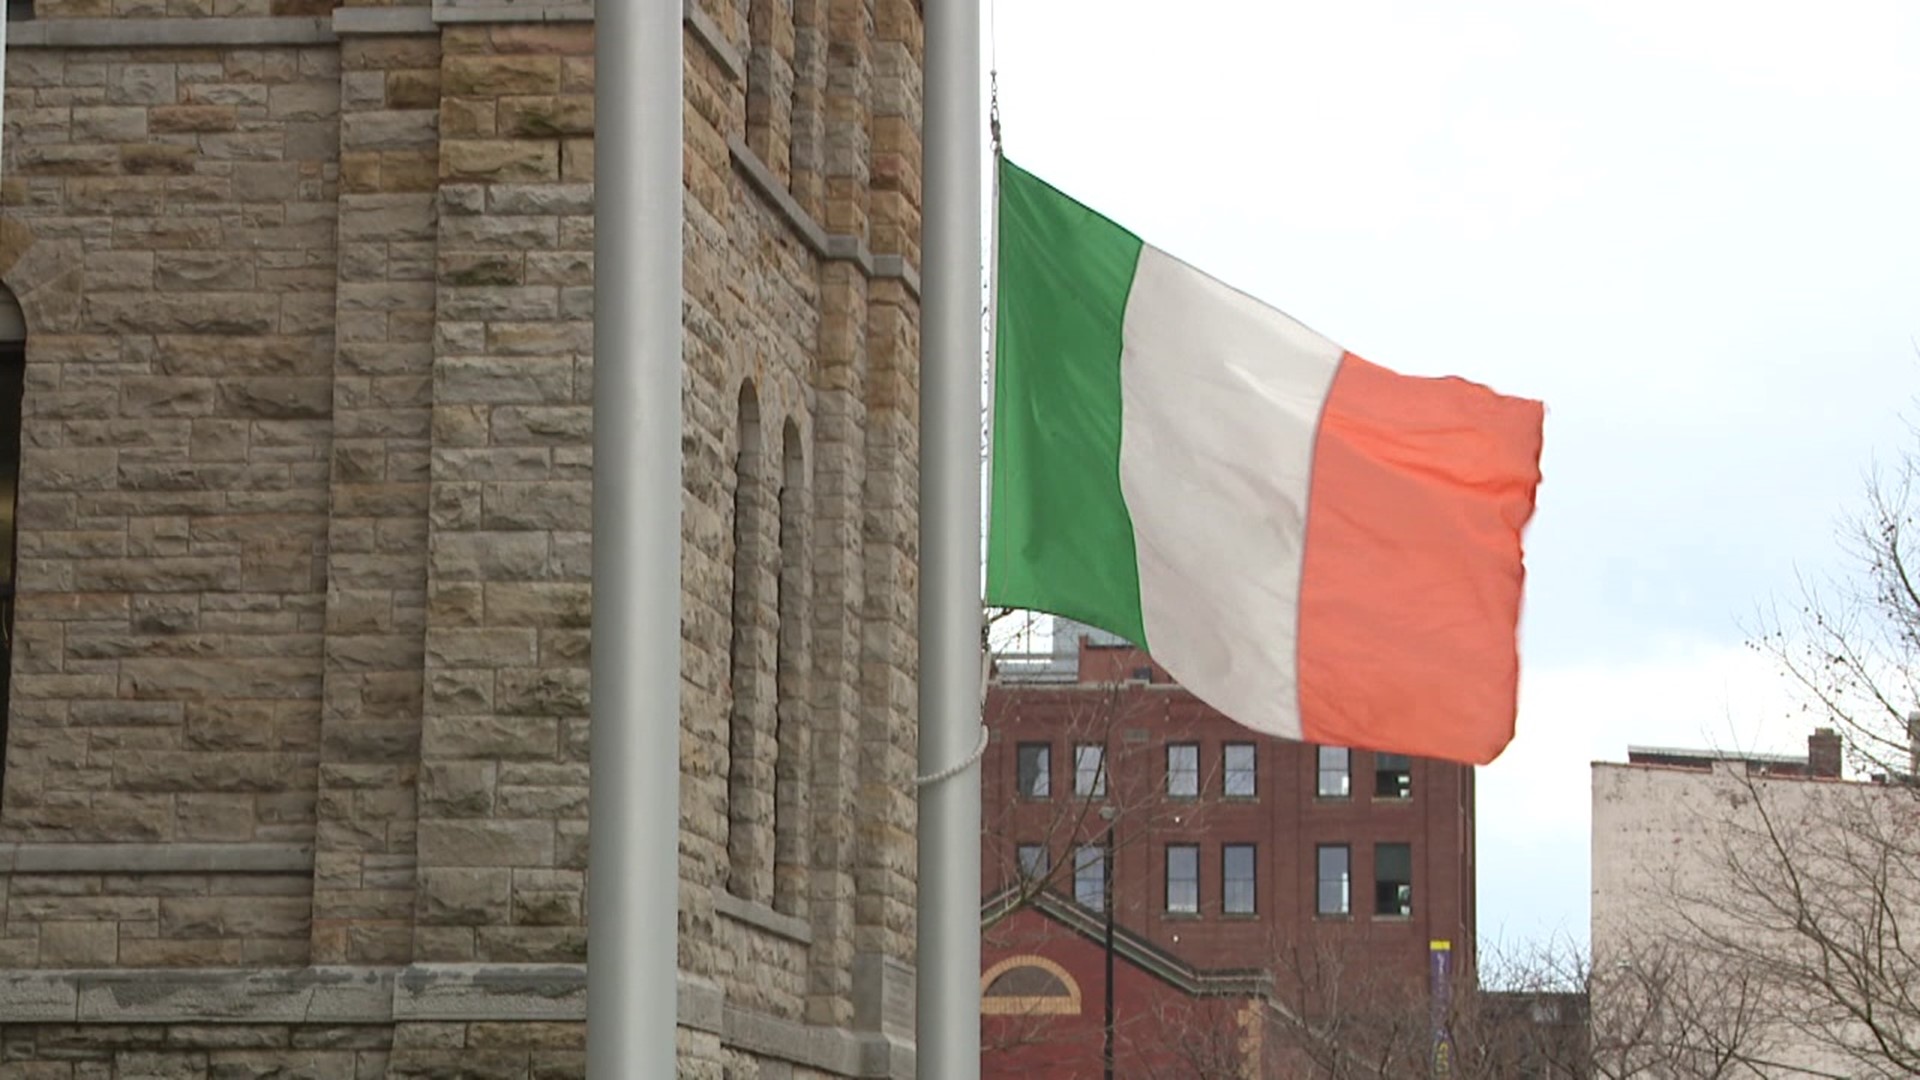 The Irish Cultural Society and the Ancient Order of Hibernians attended flag-raising.